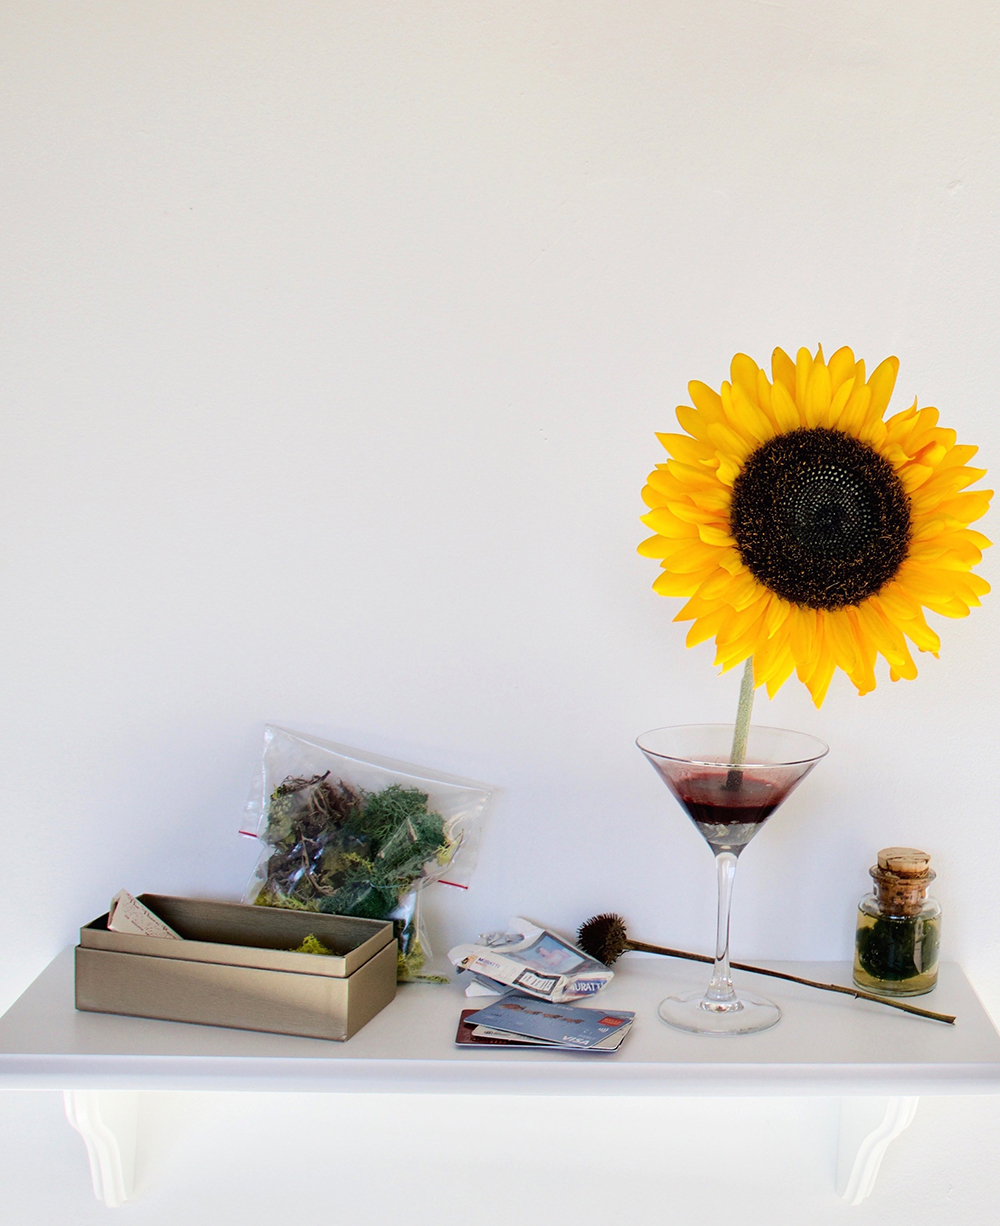 A shelf with a bloody martini glass that has a flower growing out of it along with other small ritual objects